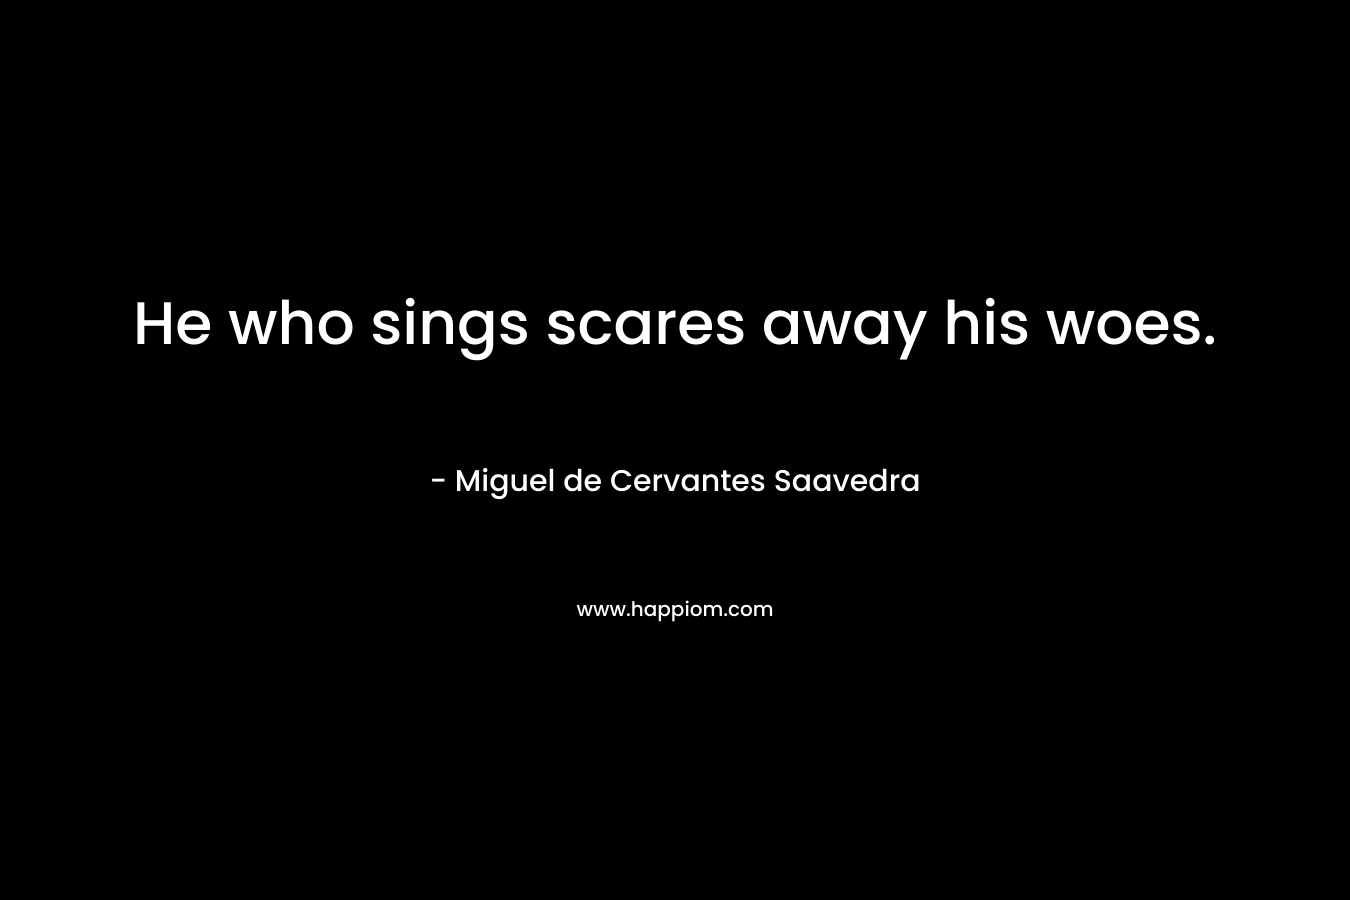 He who sings scares away his woes.